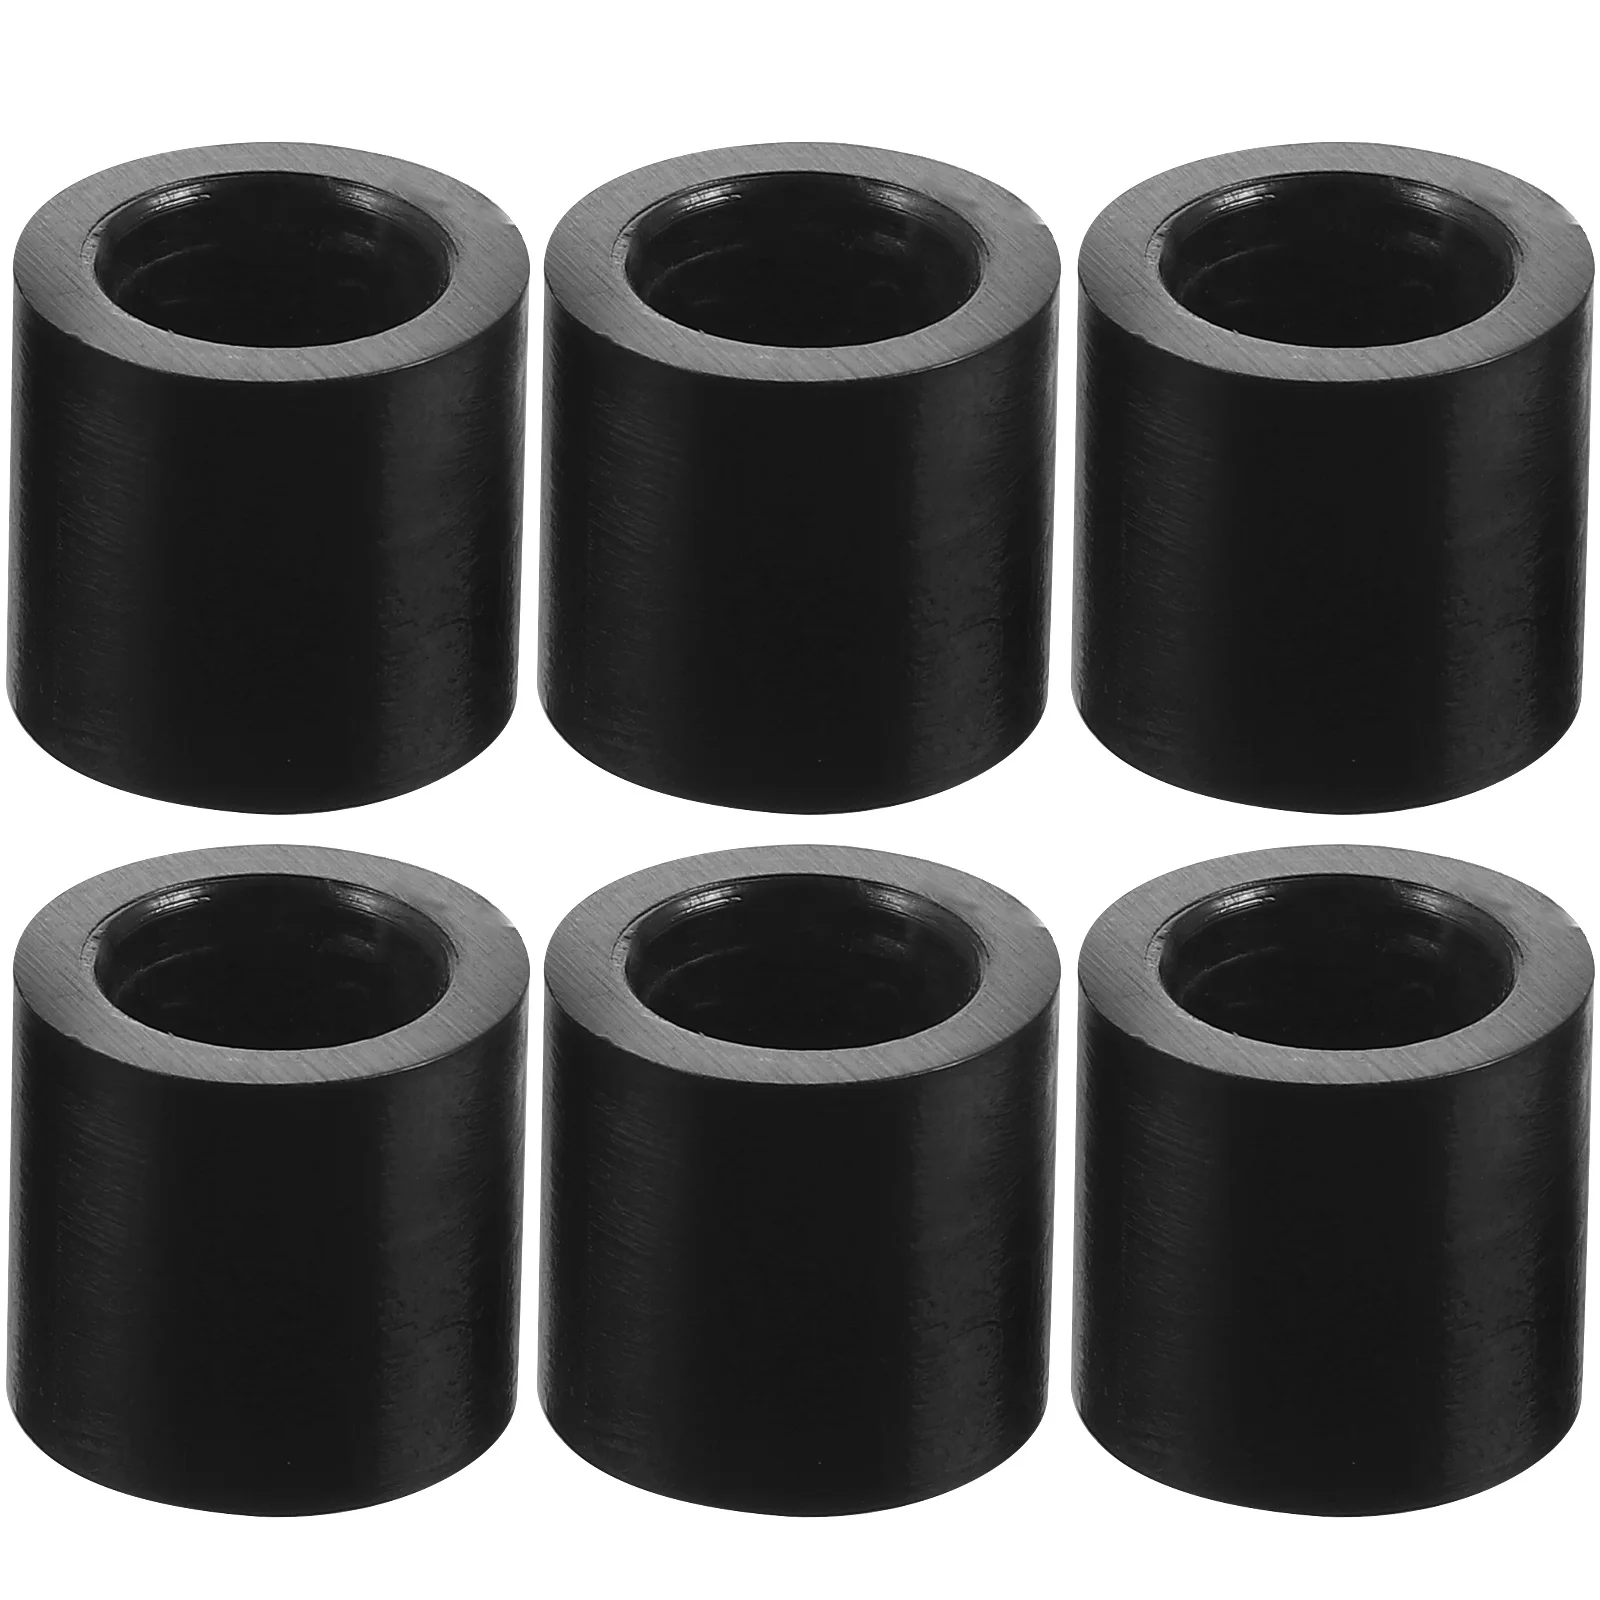 6 Pcs Billiard Cue Protective Cover Snooker Supplies Pool Supply Portable Replacement Ferrules Tips Plastic